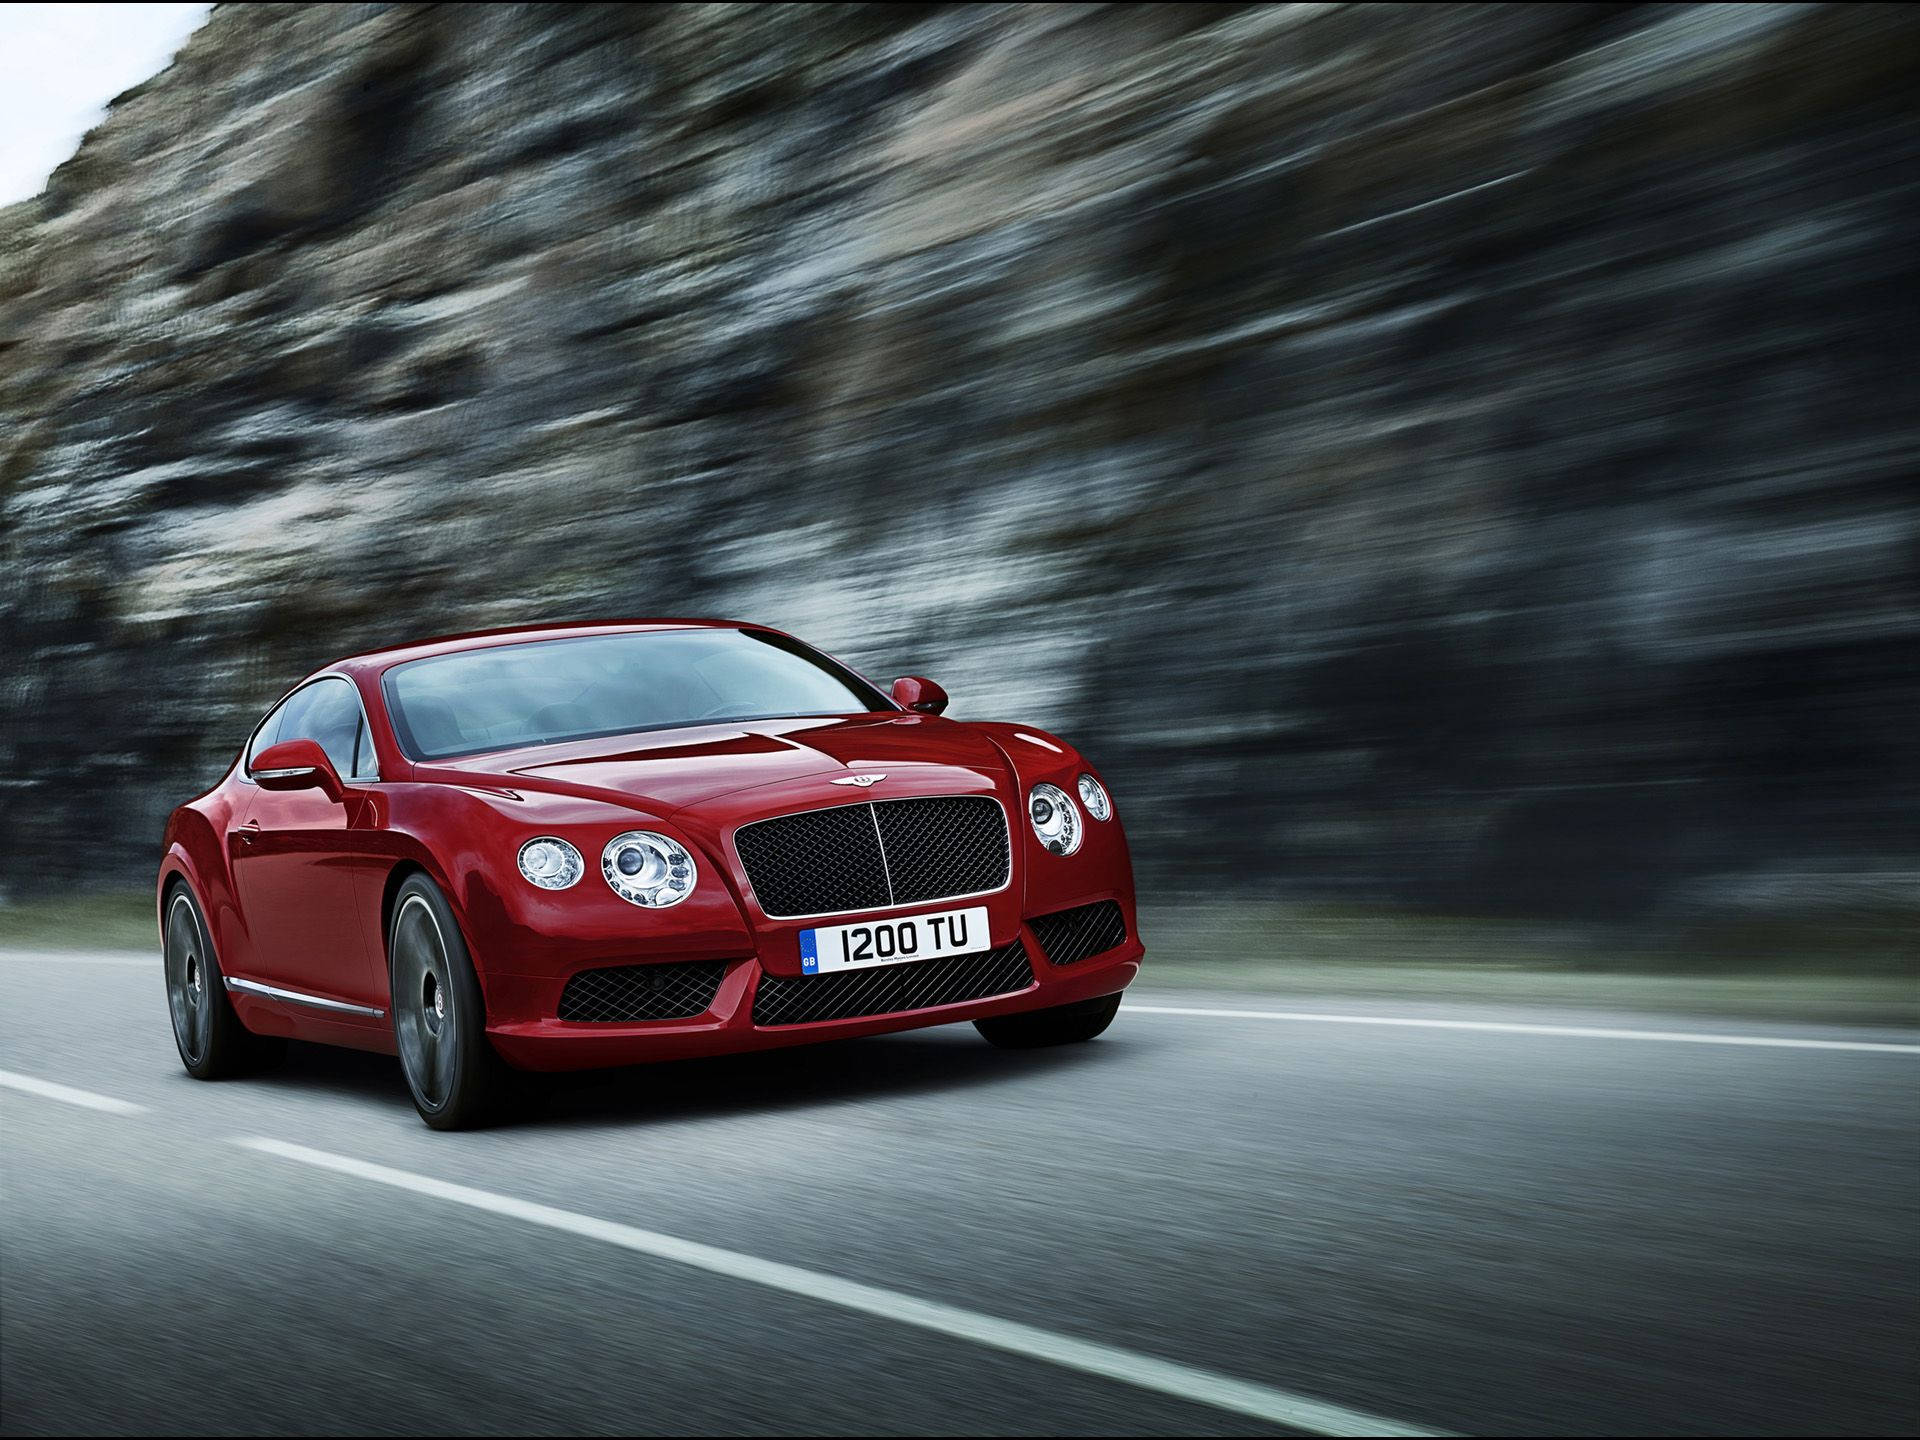 Red Bentley Speeding On The Road Background